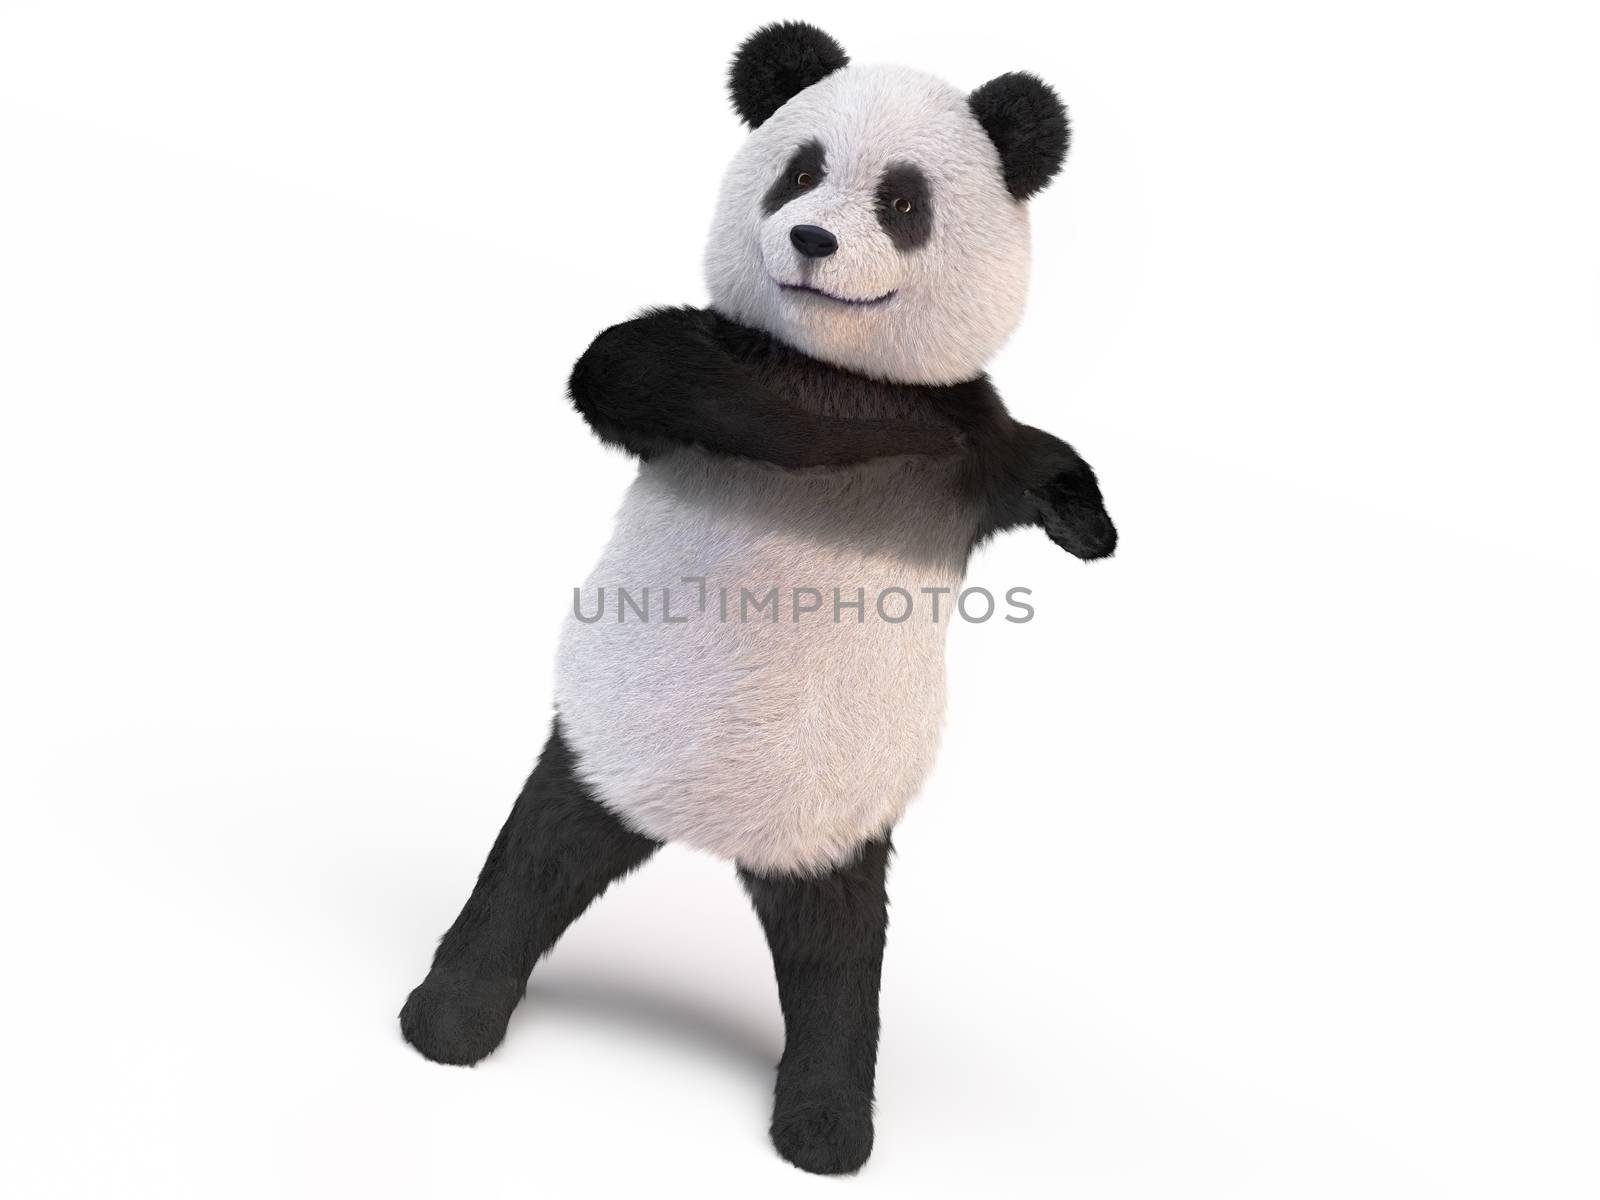 furry panda stands on two legs and makes twisting the body